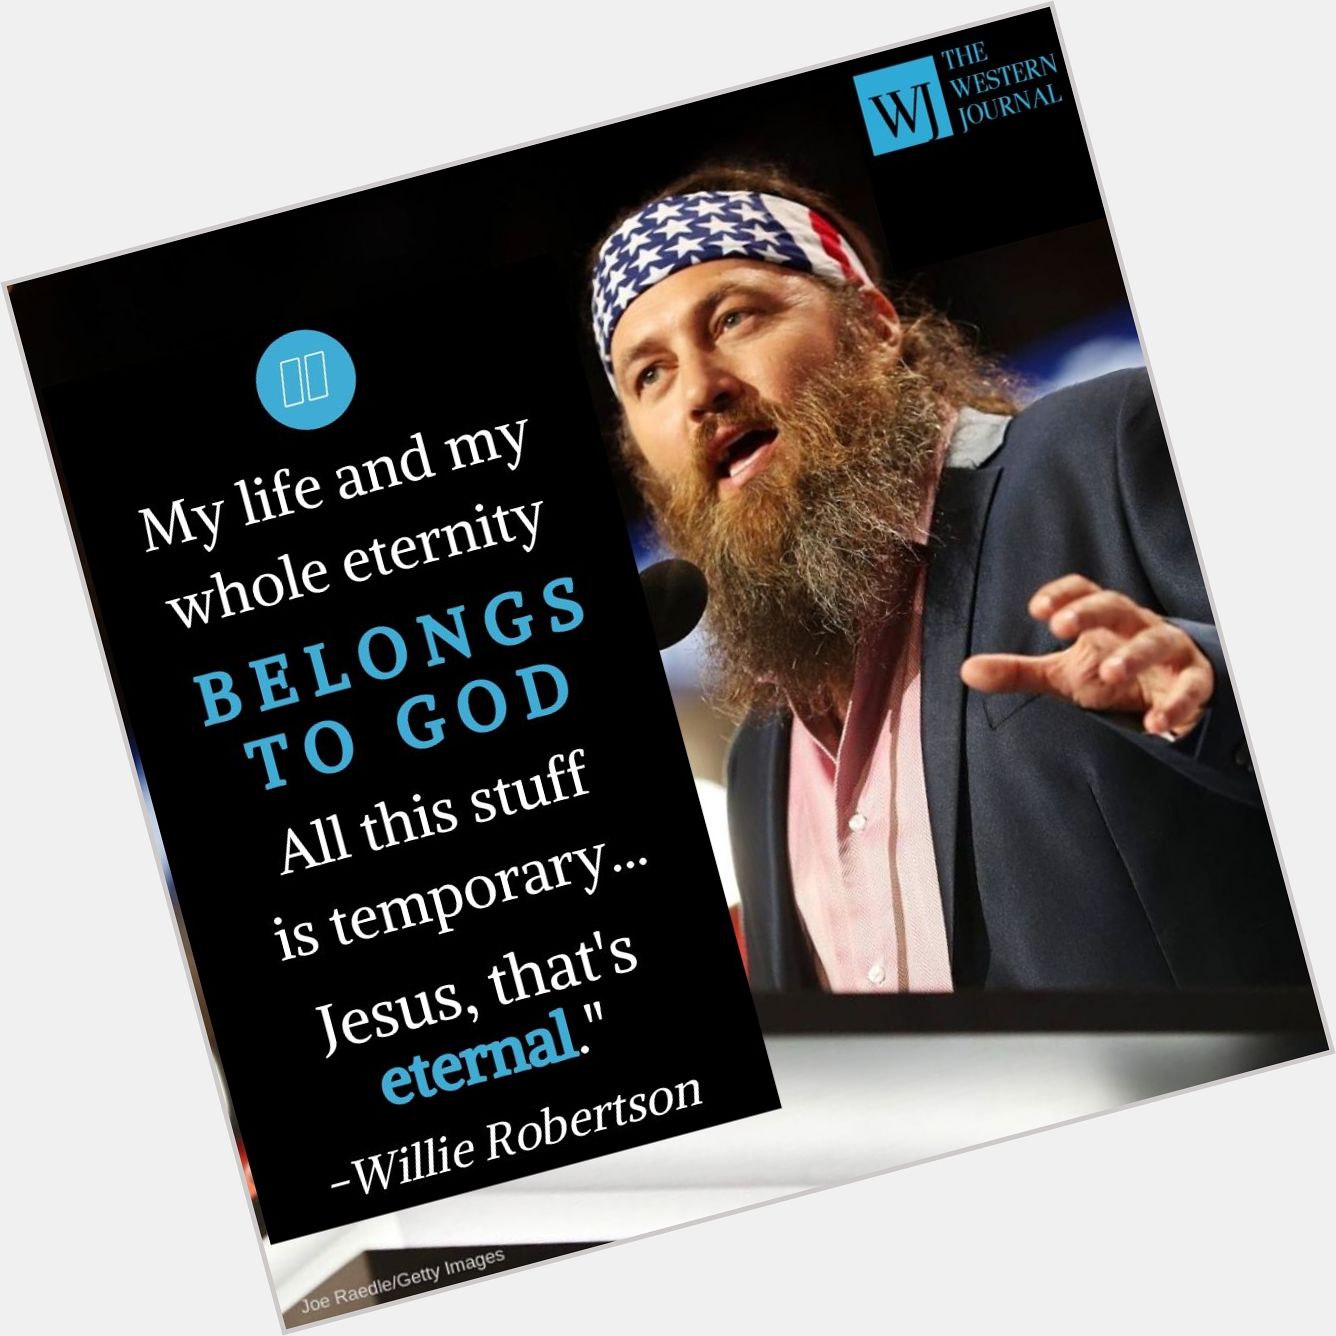 Happy 48th Birthday, Willie Robertson! Read his story behind faith, fame & family business:  